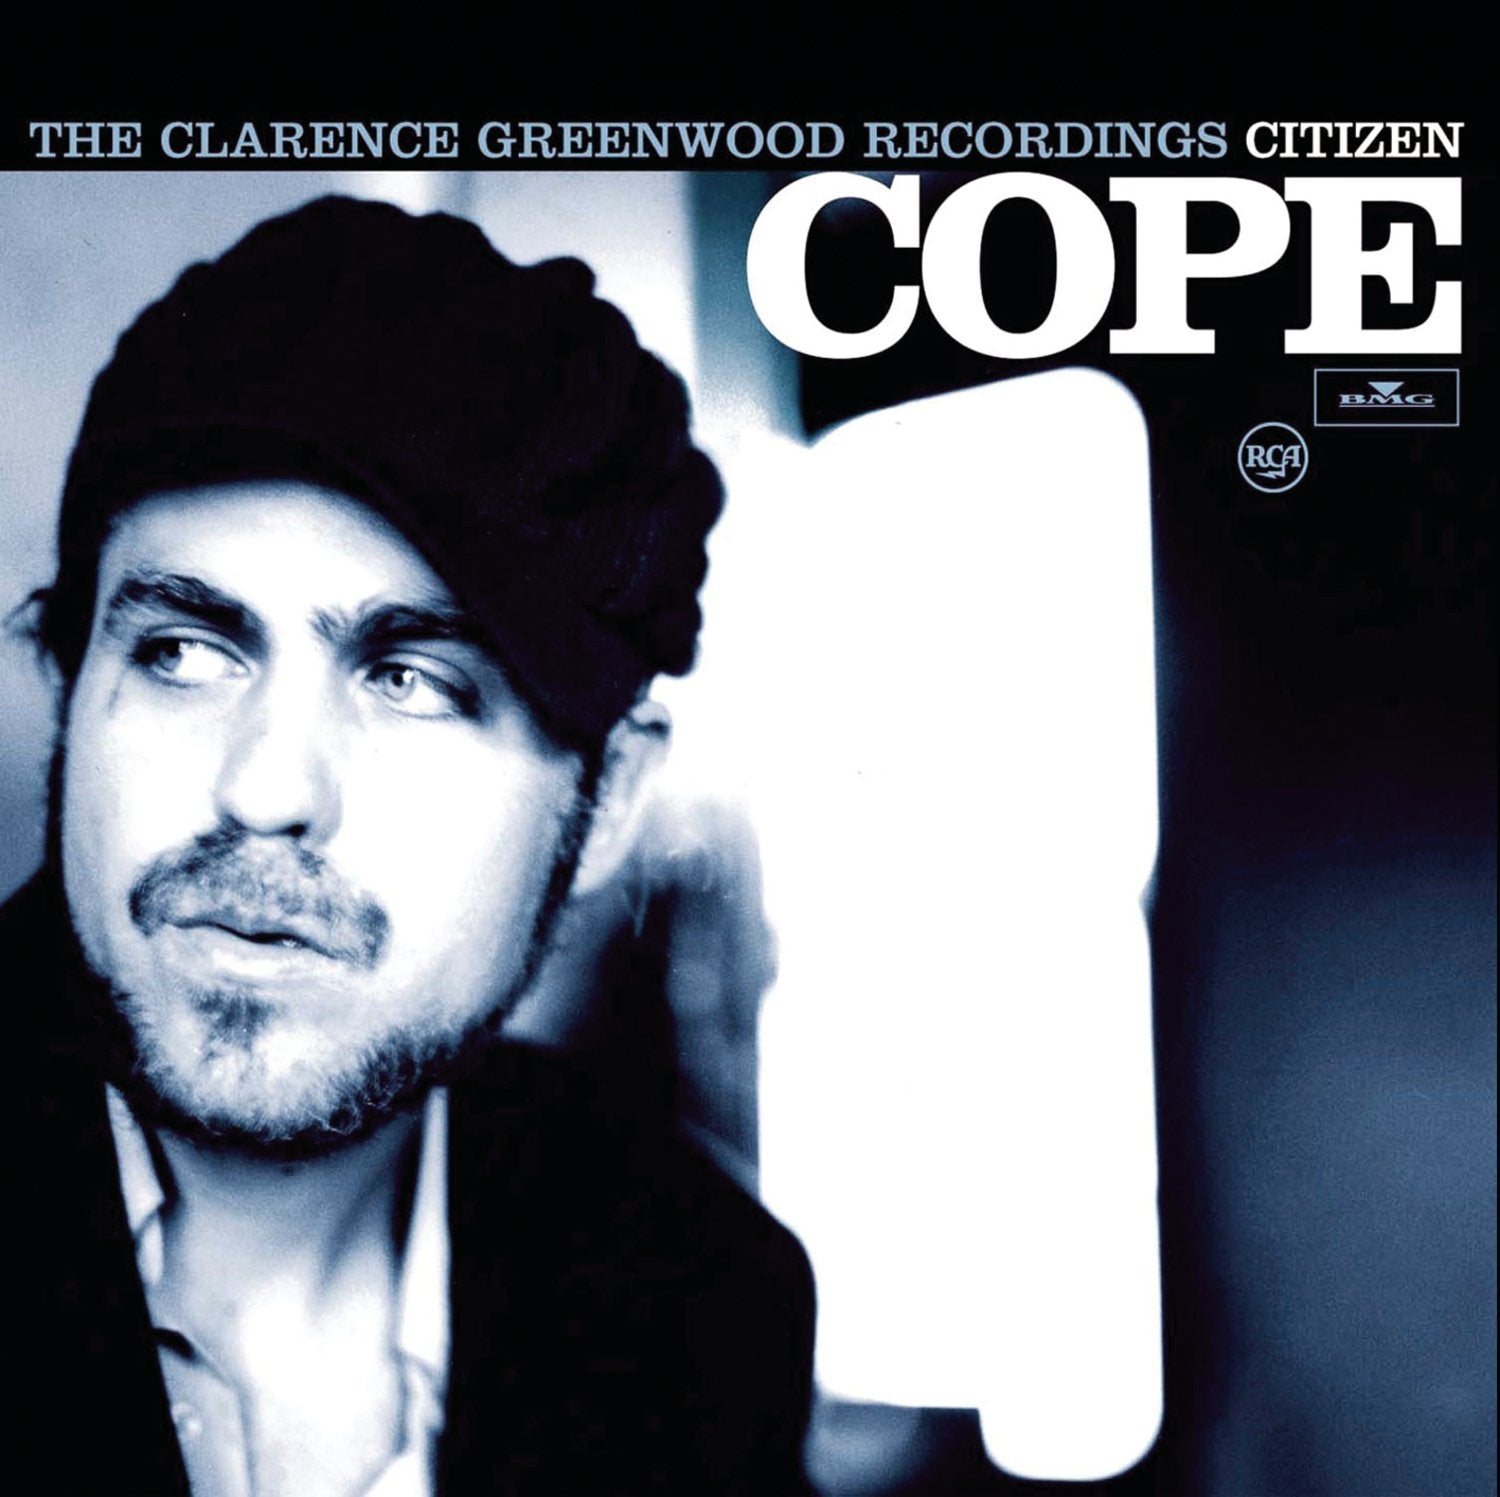 Citizen Cope- The Clarence Greenwood Recordings